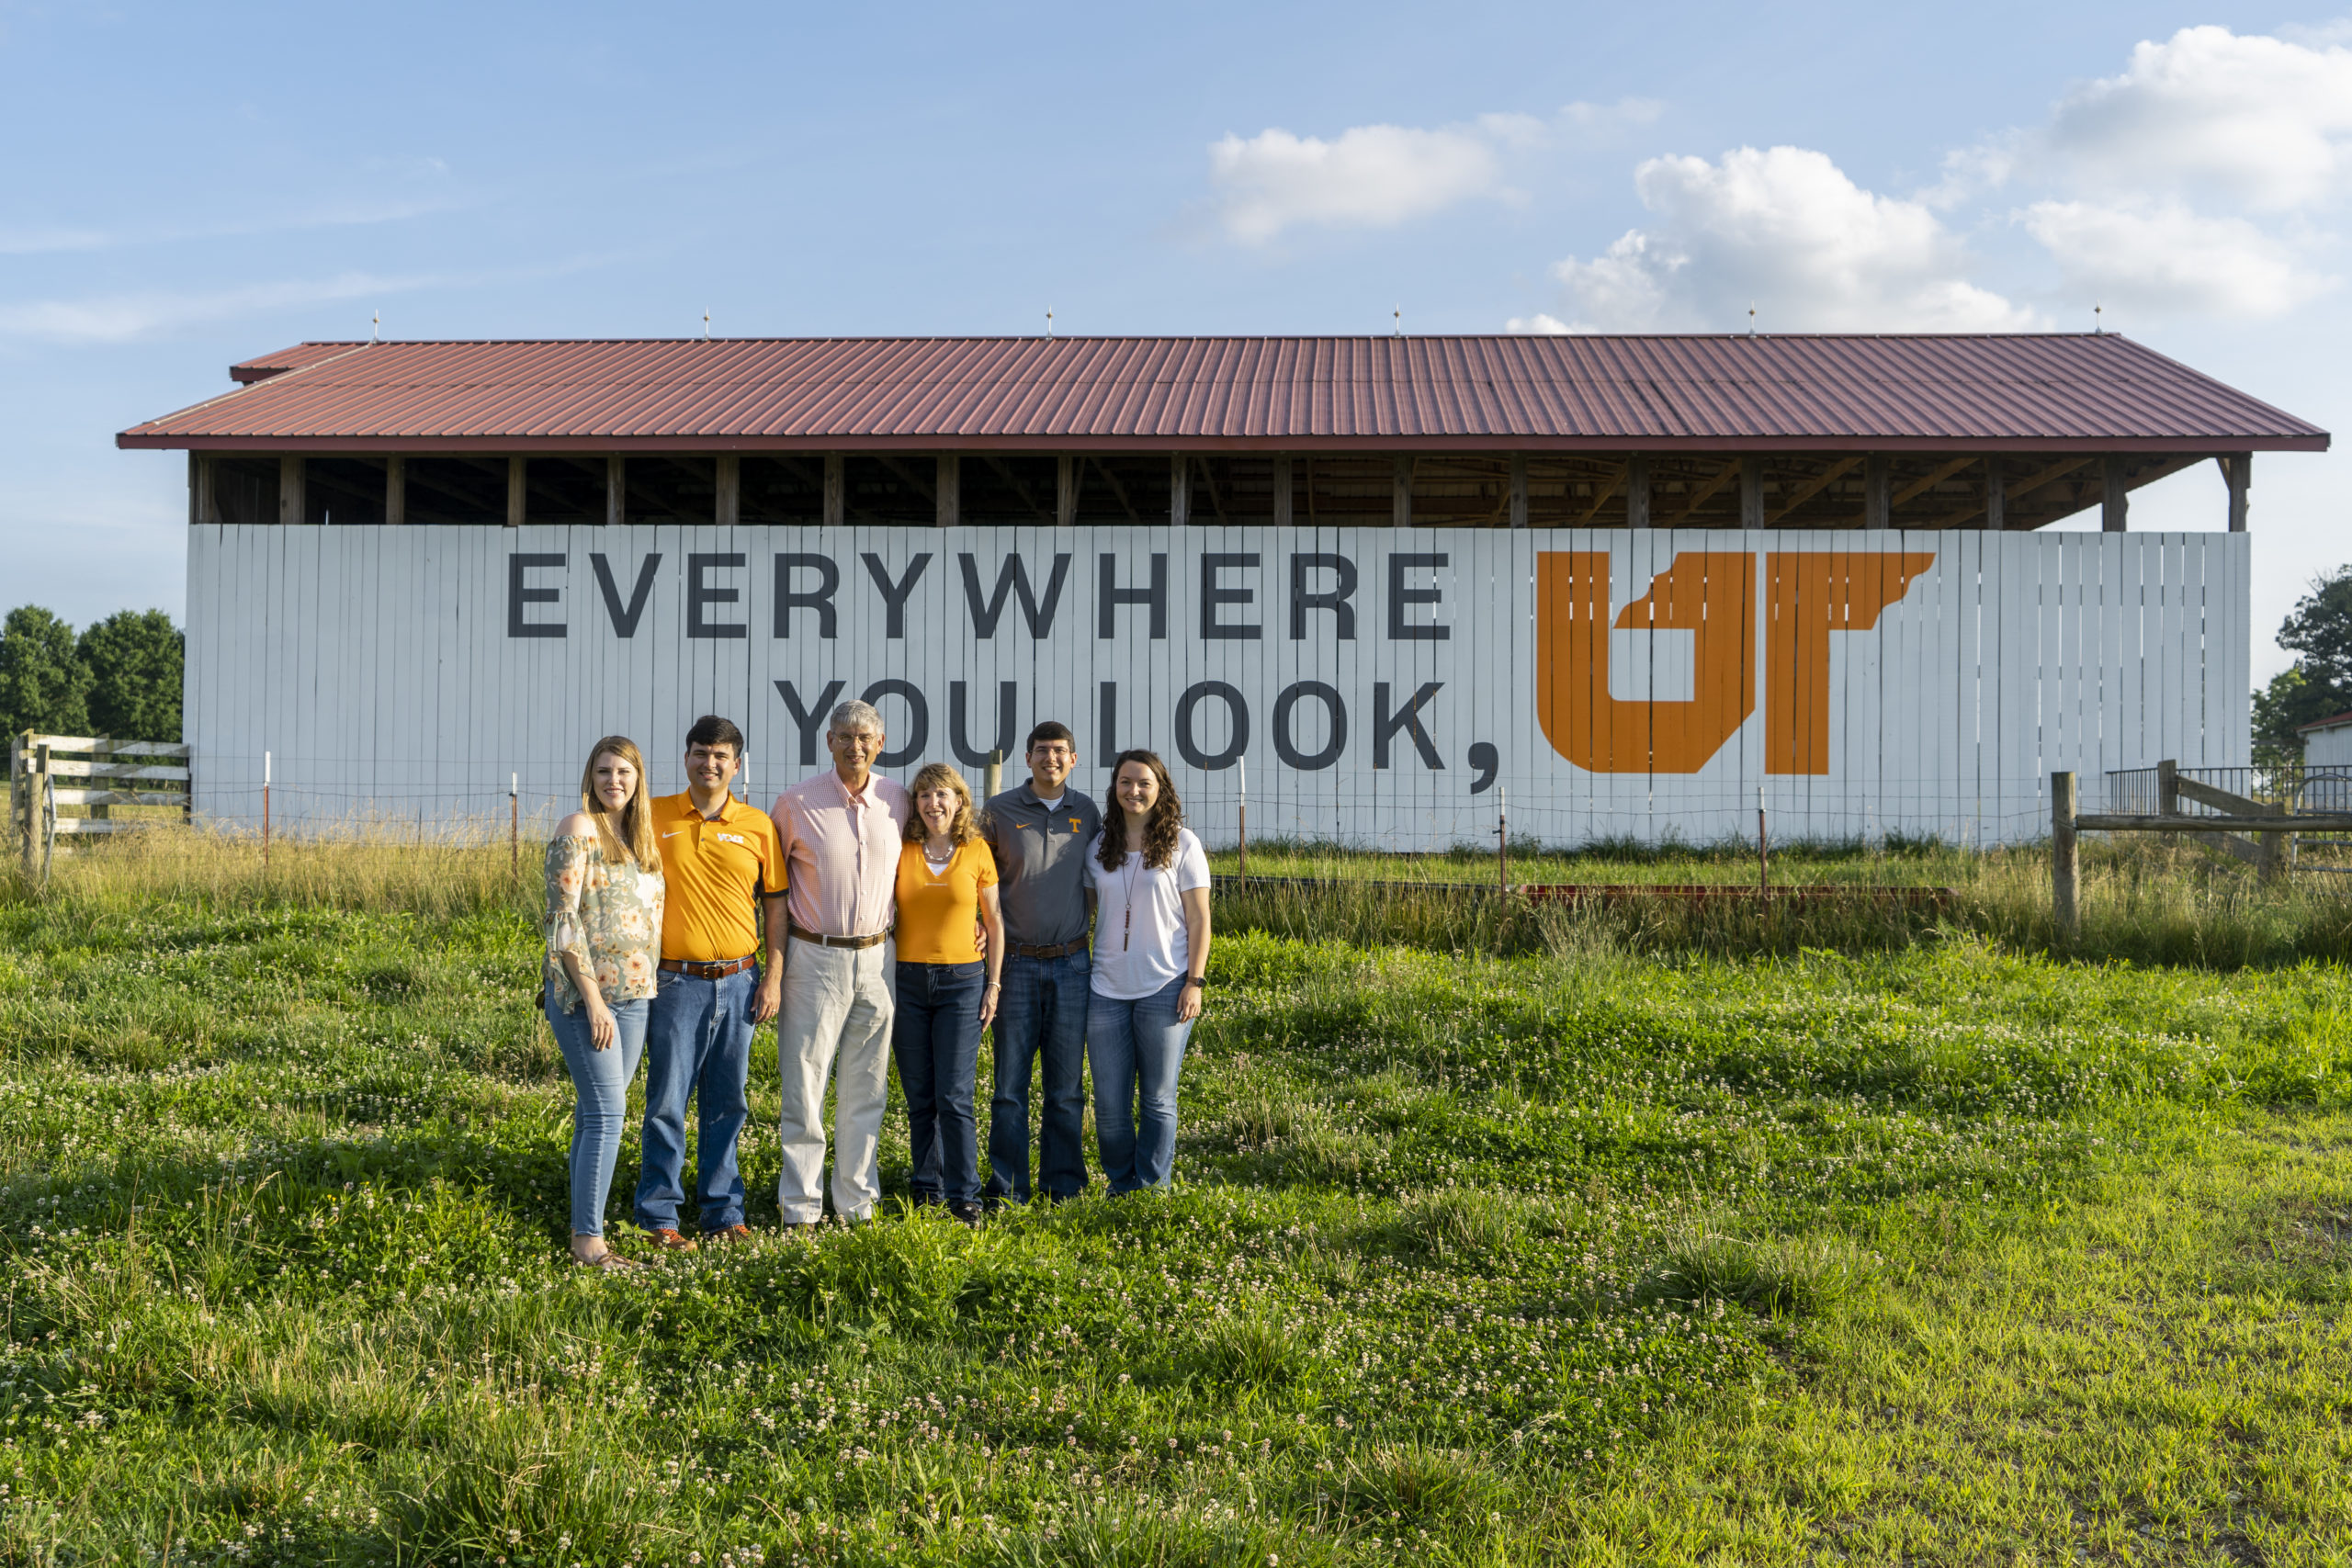 McLanahan Family in front of the 15th mural in the Everywhere UT campaign, in Crossville, TN. 